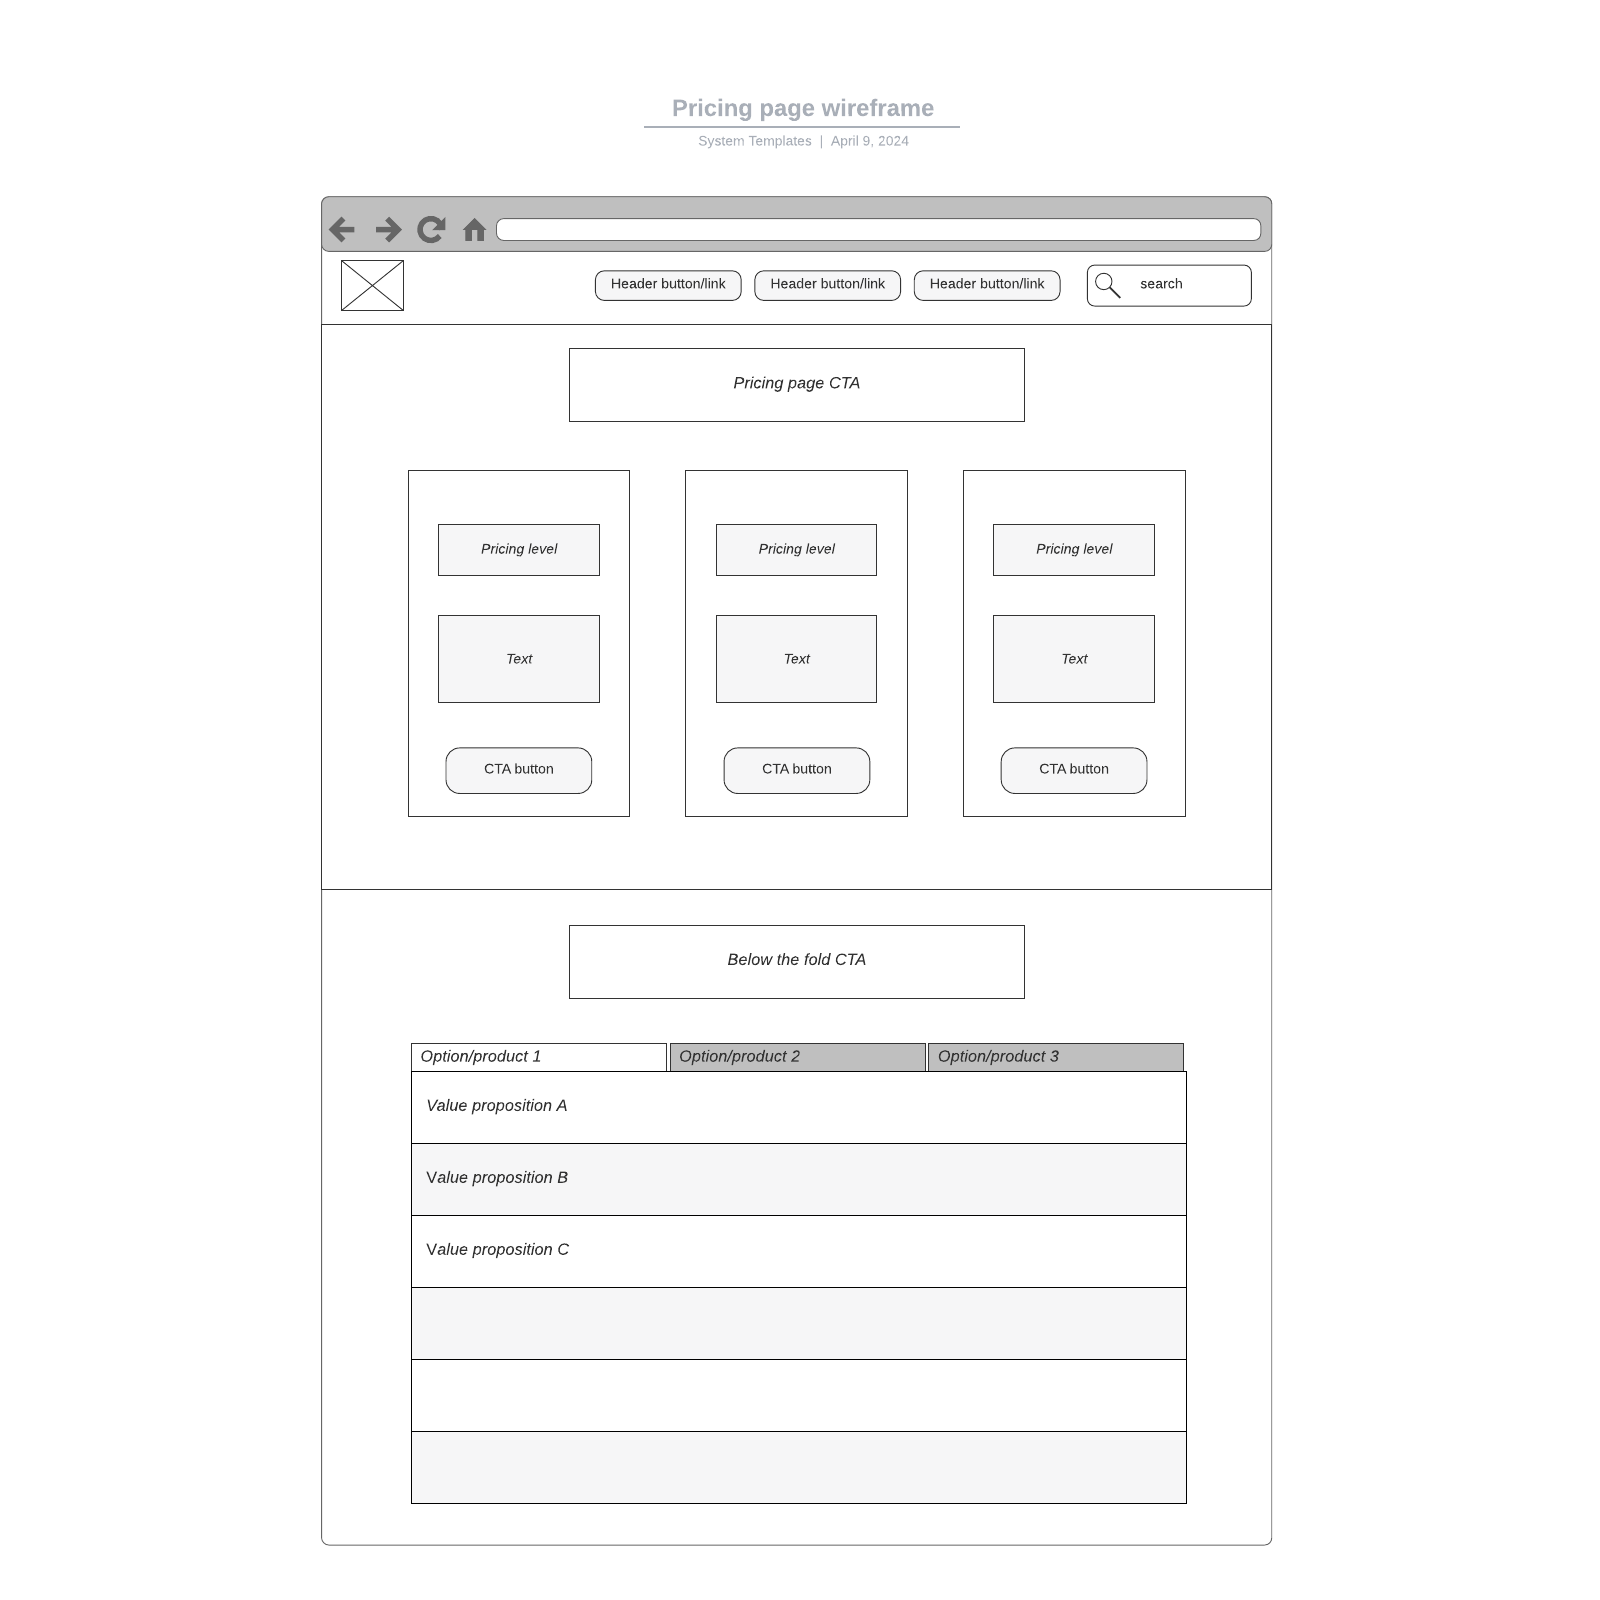 Pricing page wireframe example